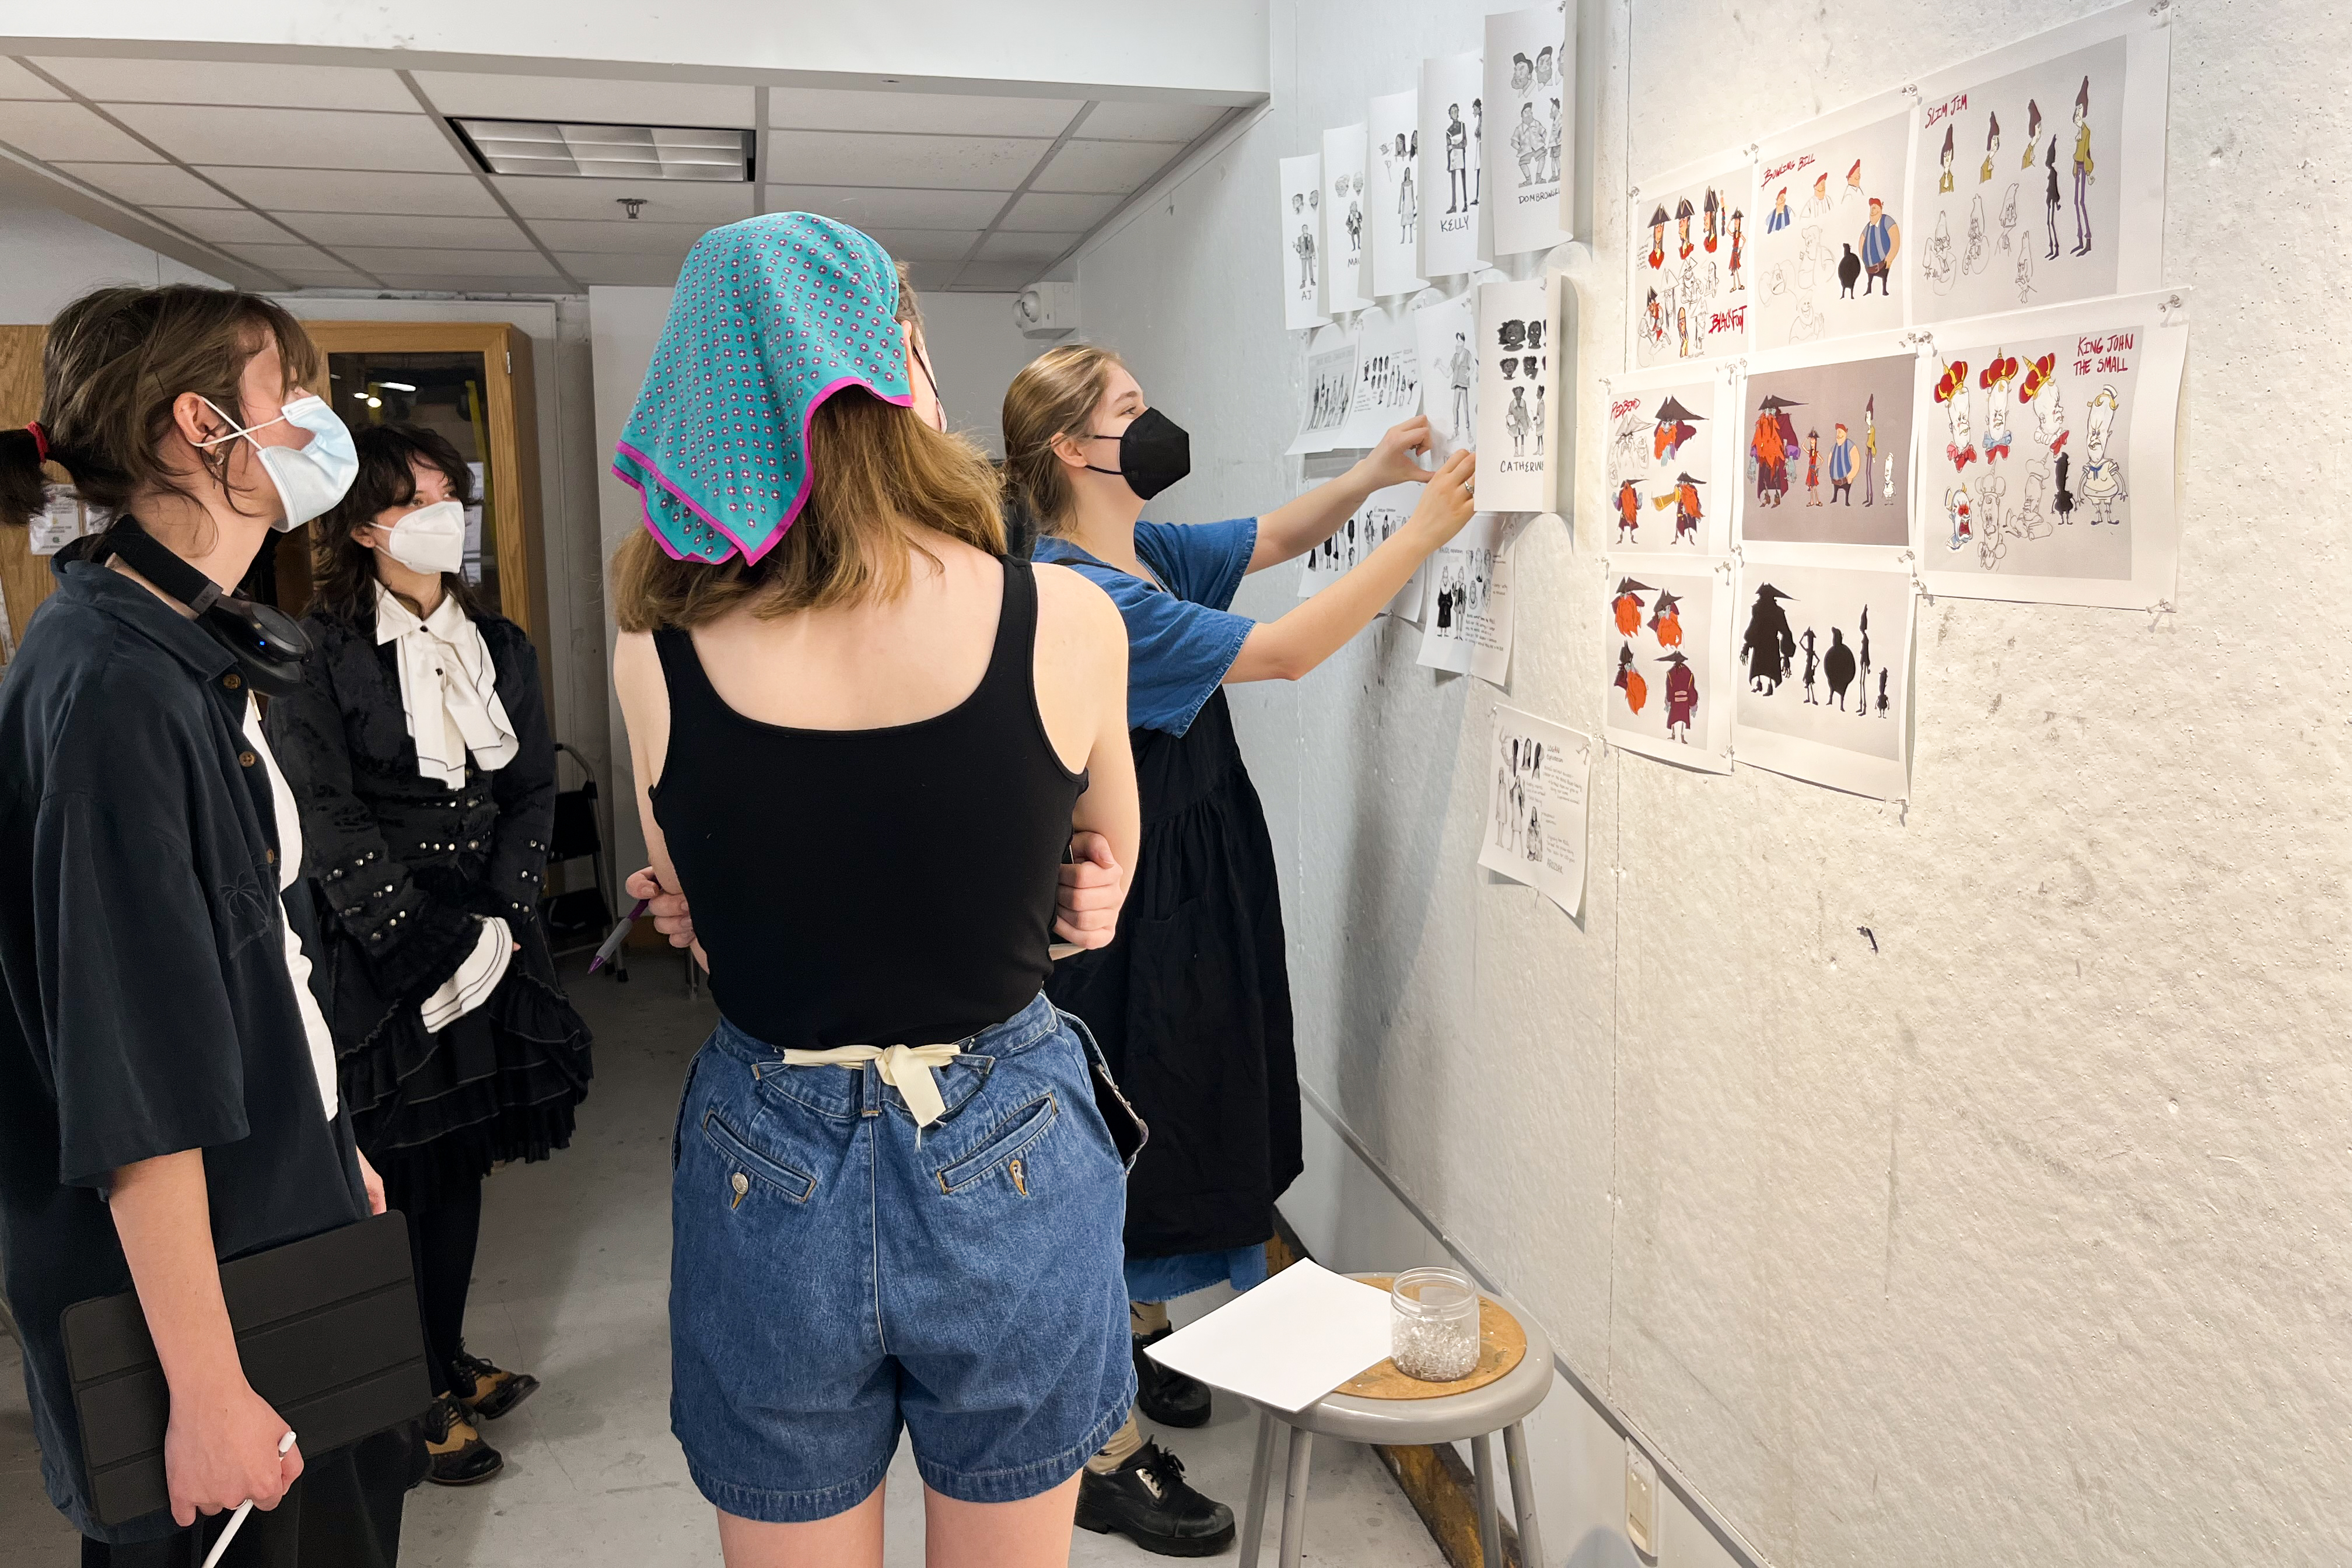 a group of students discuss work pinned on the wall